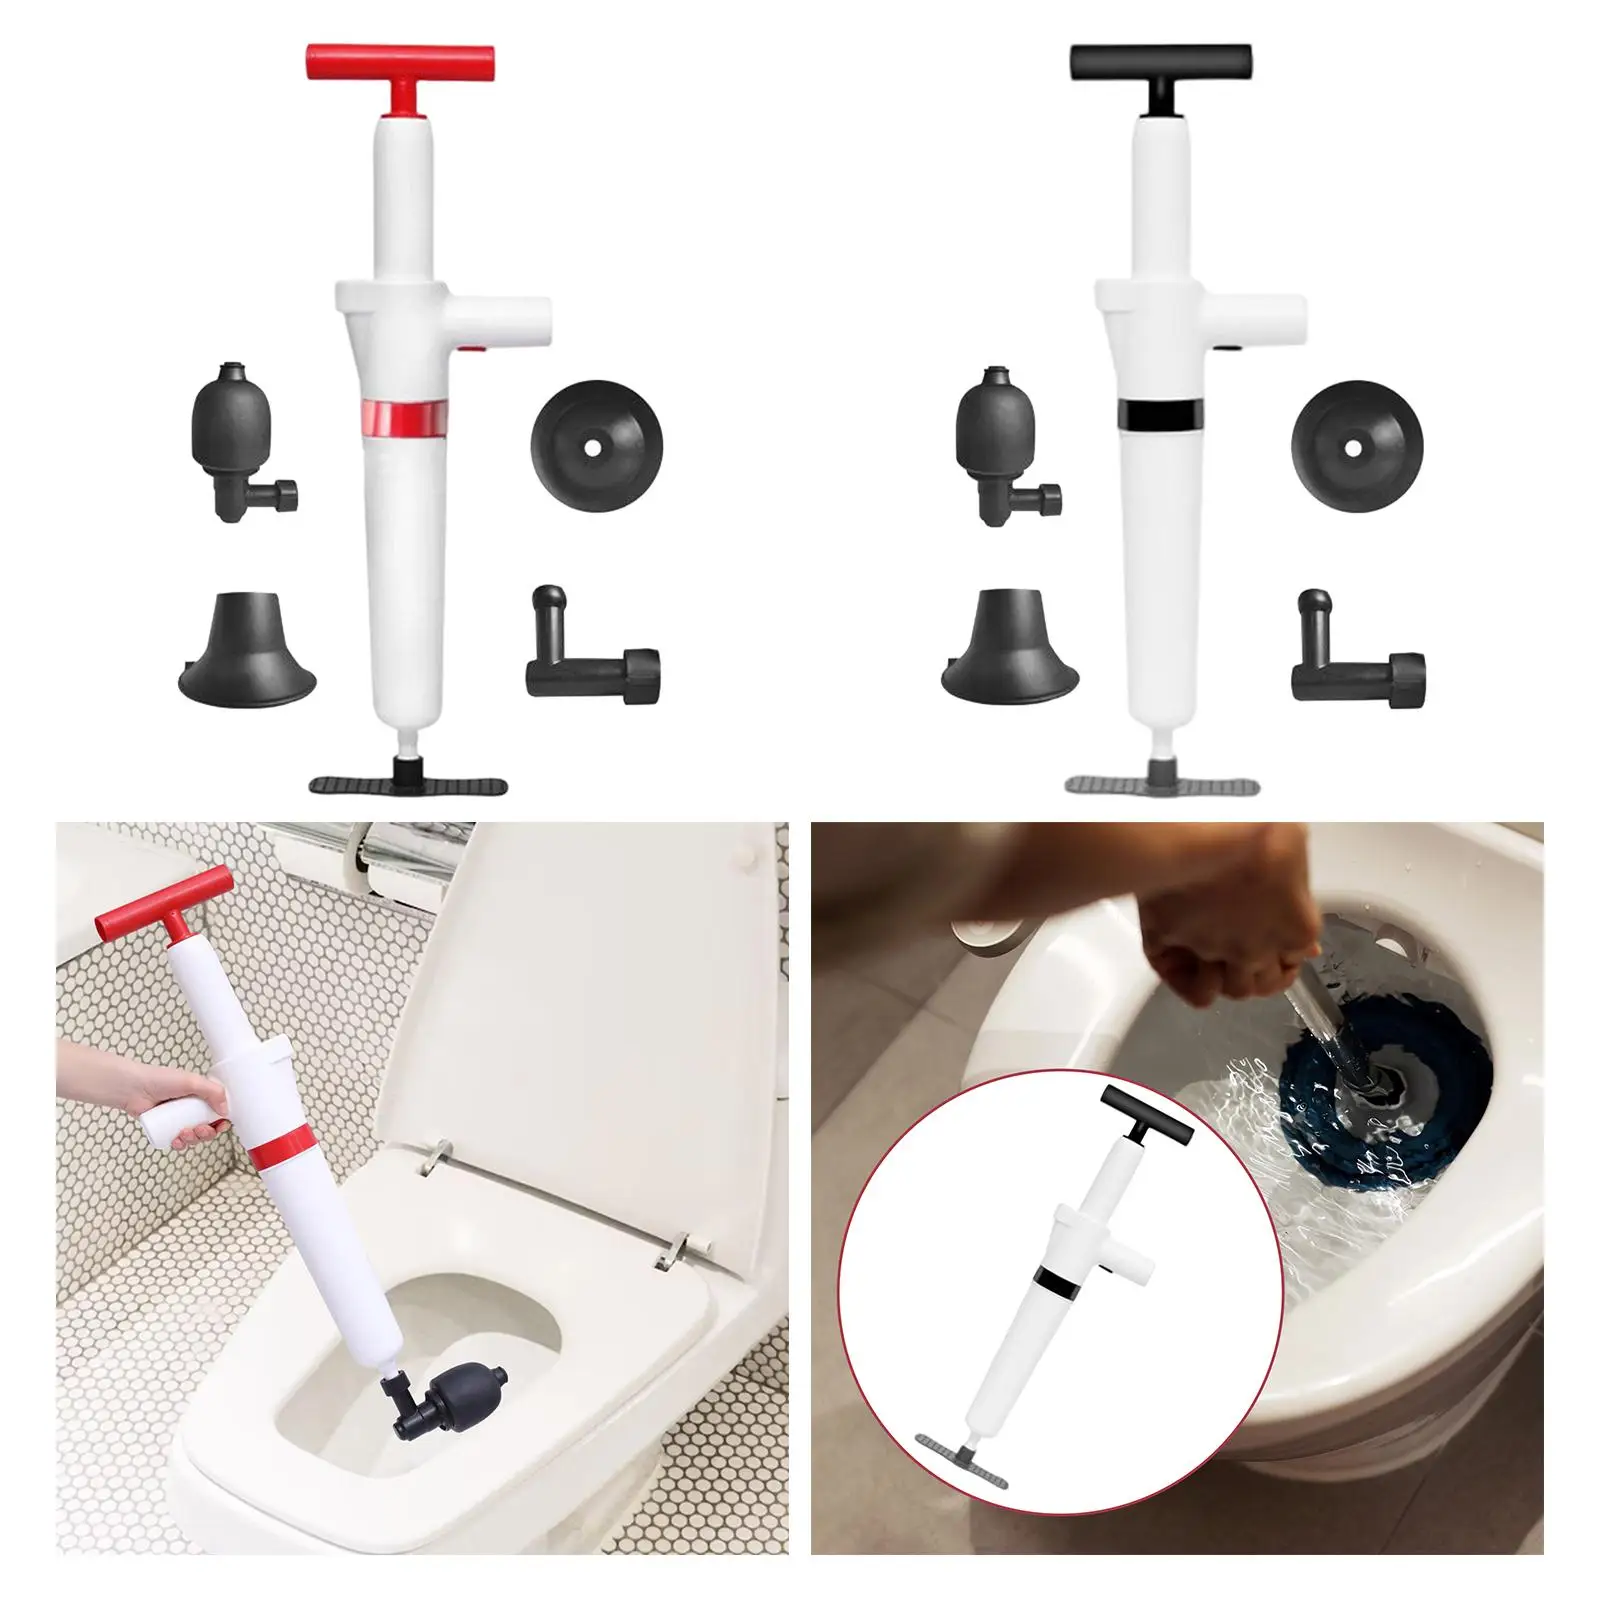 High Pressure Toilet Plunger Air Drain Blaster with Real Time Barometer Clog Remover Air Toilet Unclogger for Kitchen Home